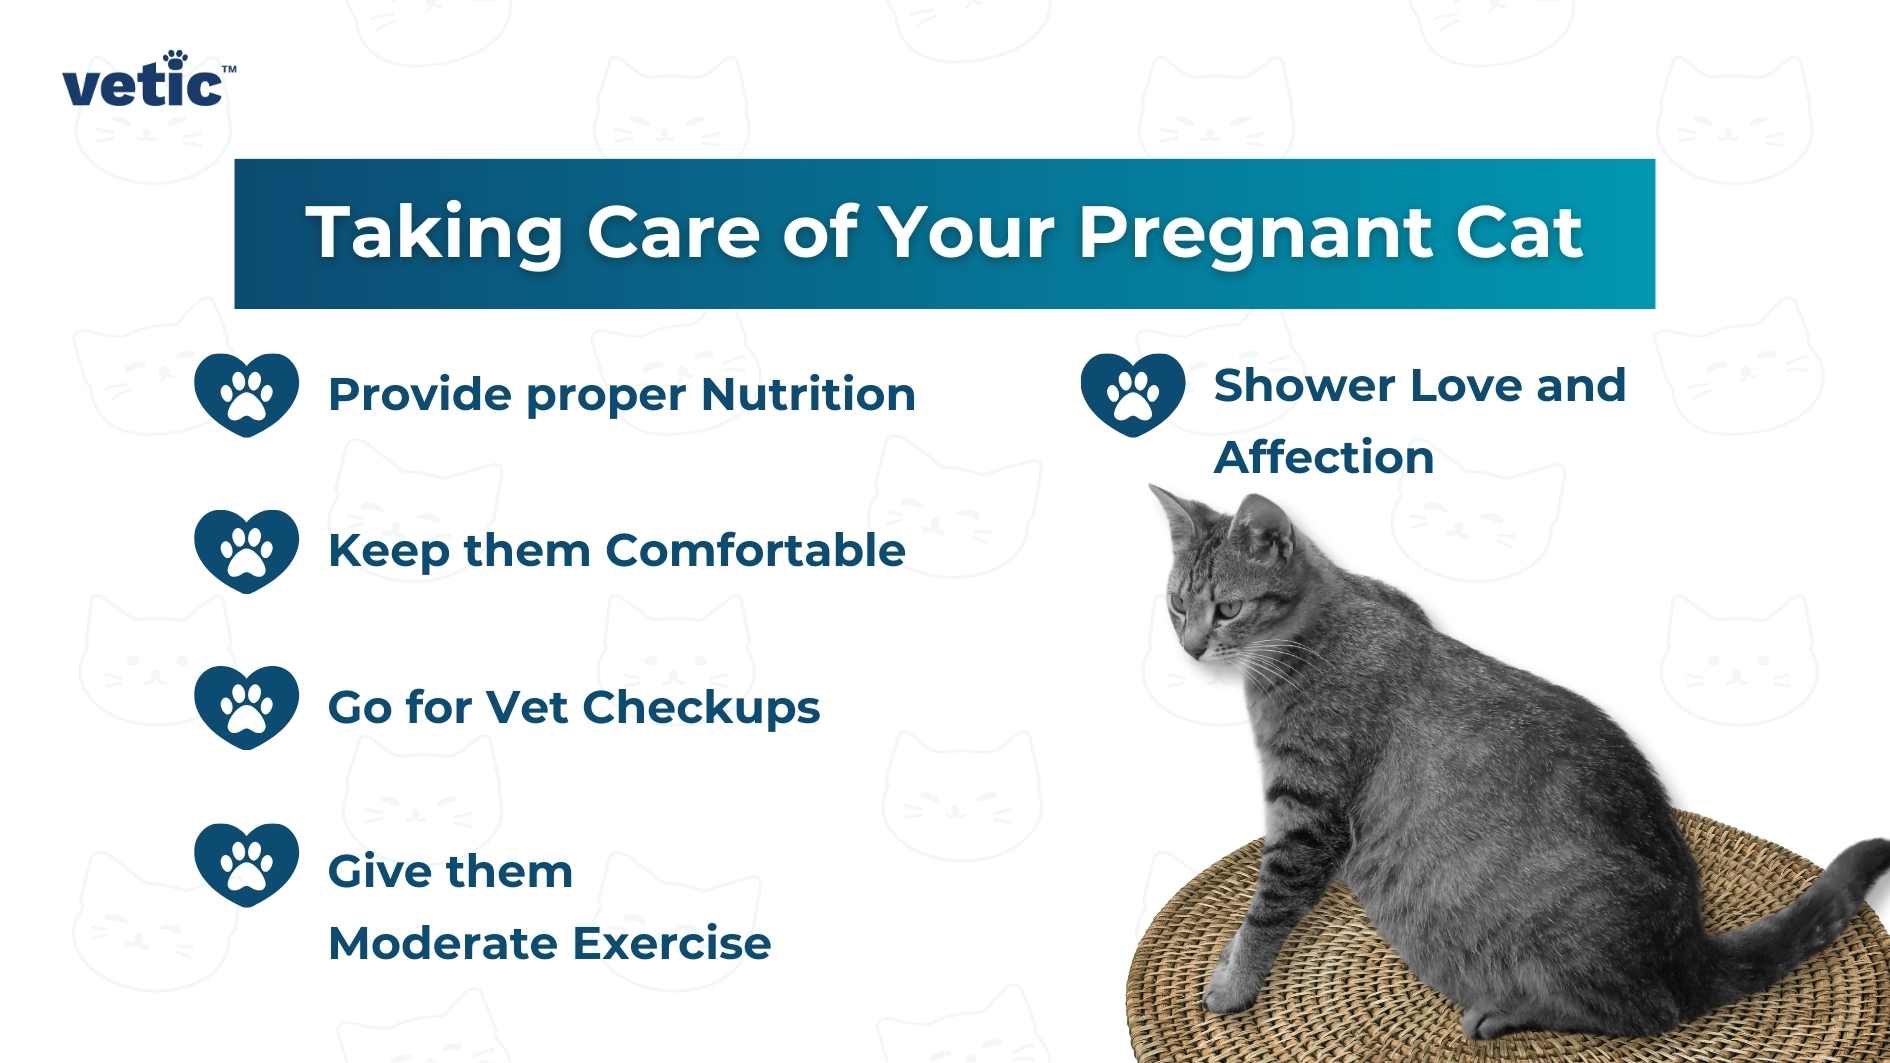 The image is an informative visual guide created by “vetic” that provides tips on taking care of pregnant cats. It features a grey cat sitting gracefully on a woven surface to the right. The text “Taking Care of Your Pregnant Cat” is written in large, bold letters at the top. Five tips are listed with corresponding icons: Provide proper Nutrition, Keep them Comfortable, Go for Vet Checkups, Give them Moderate Exercise, Shower Love and Affection. Each tip is accompanied by a blue paw print icon. This image seems to be relevant for pet owners seeking guidance in ensuring the well-being of their expectant feline friends.